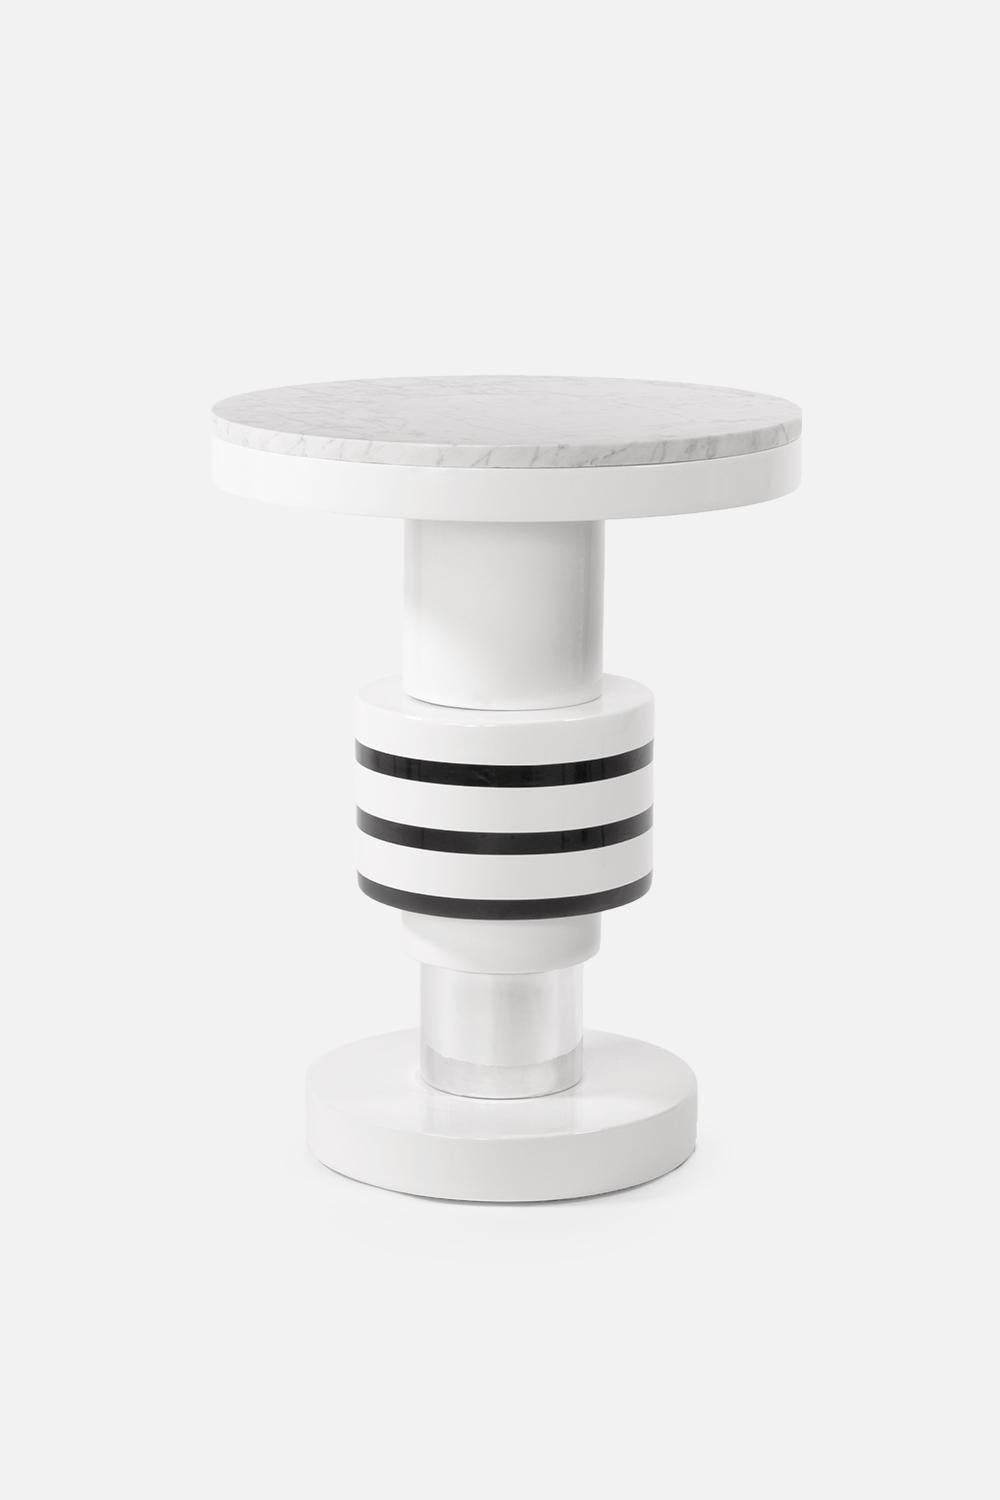 Ceramic and marble side table by Eric Willemart

Materials: Polished Carrara marble plate embedded in a white lacquered wooden tray
Body materials: Handcrafted ceramic glazed in black, white and silver finishes
Base materials: White lacquered